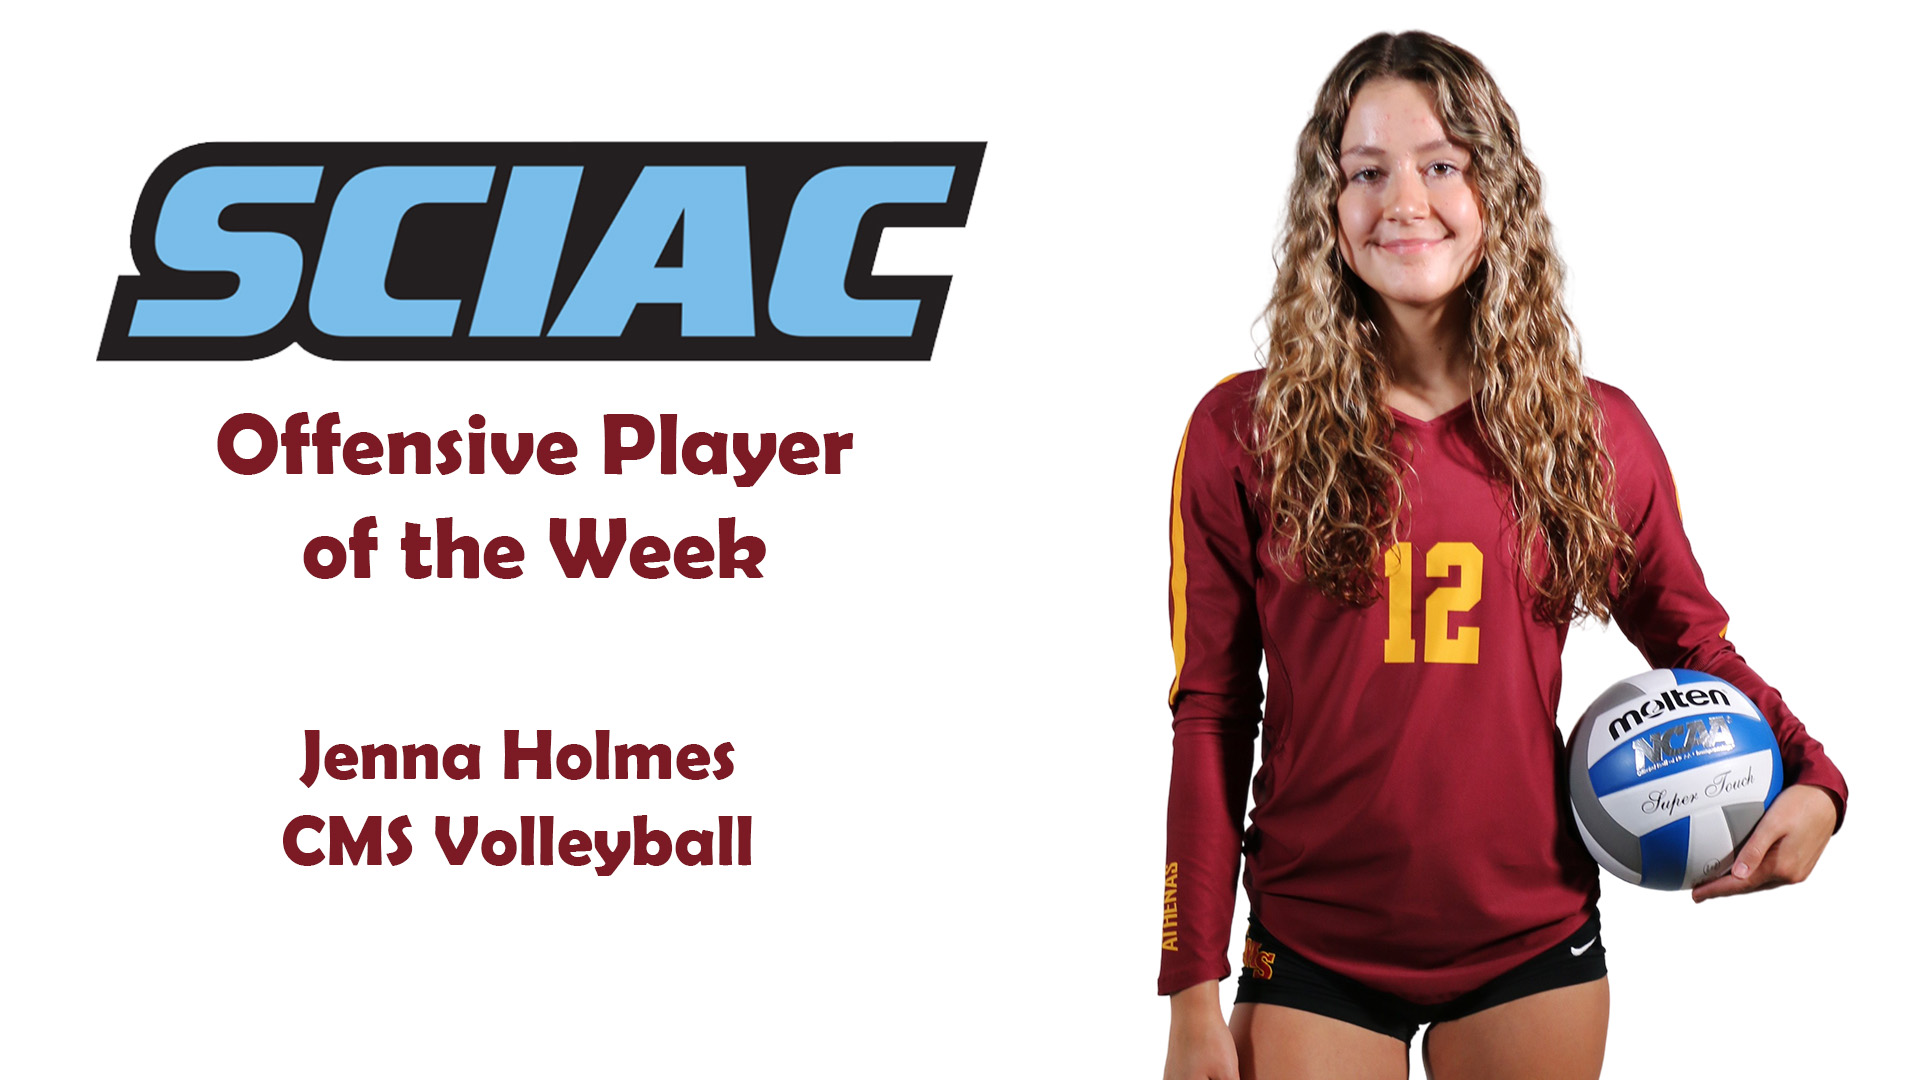 posed shot of Jenna Holmes with the SCIAC logo